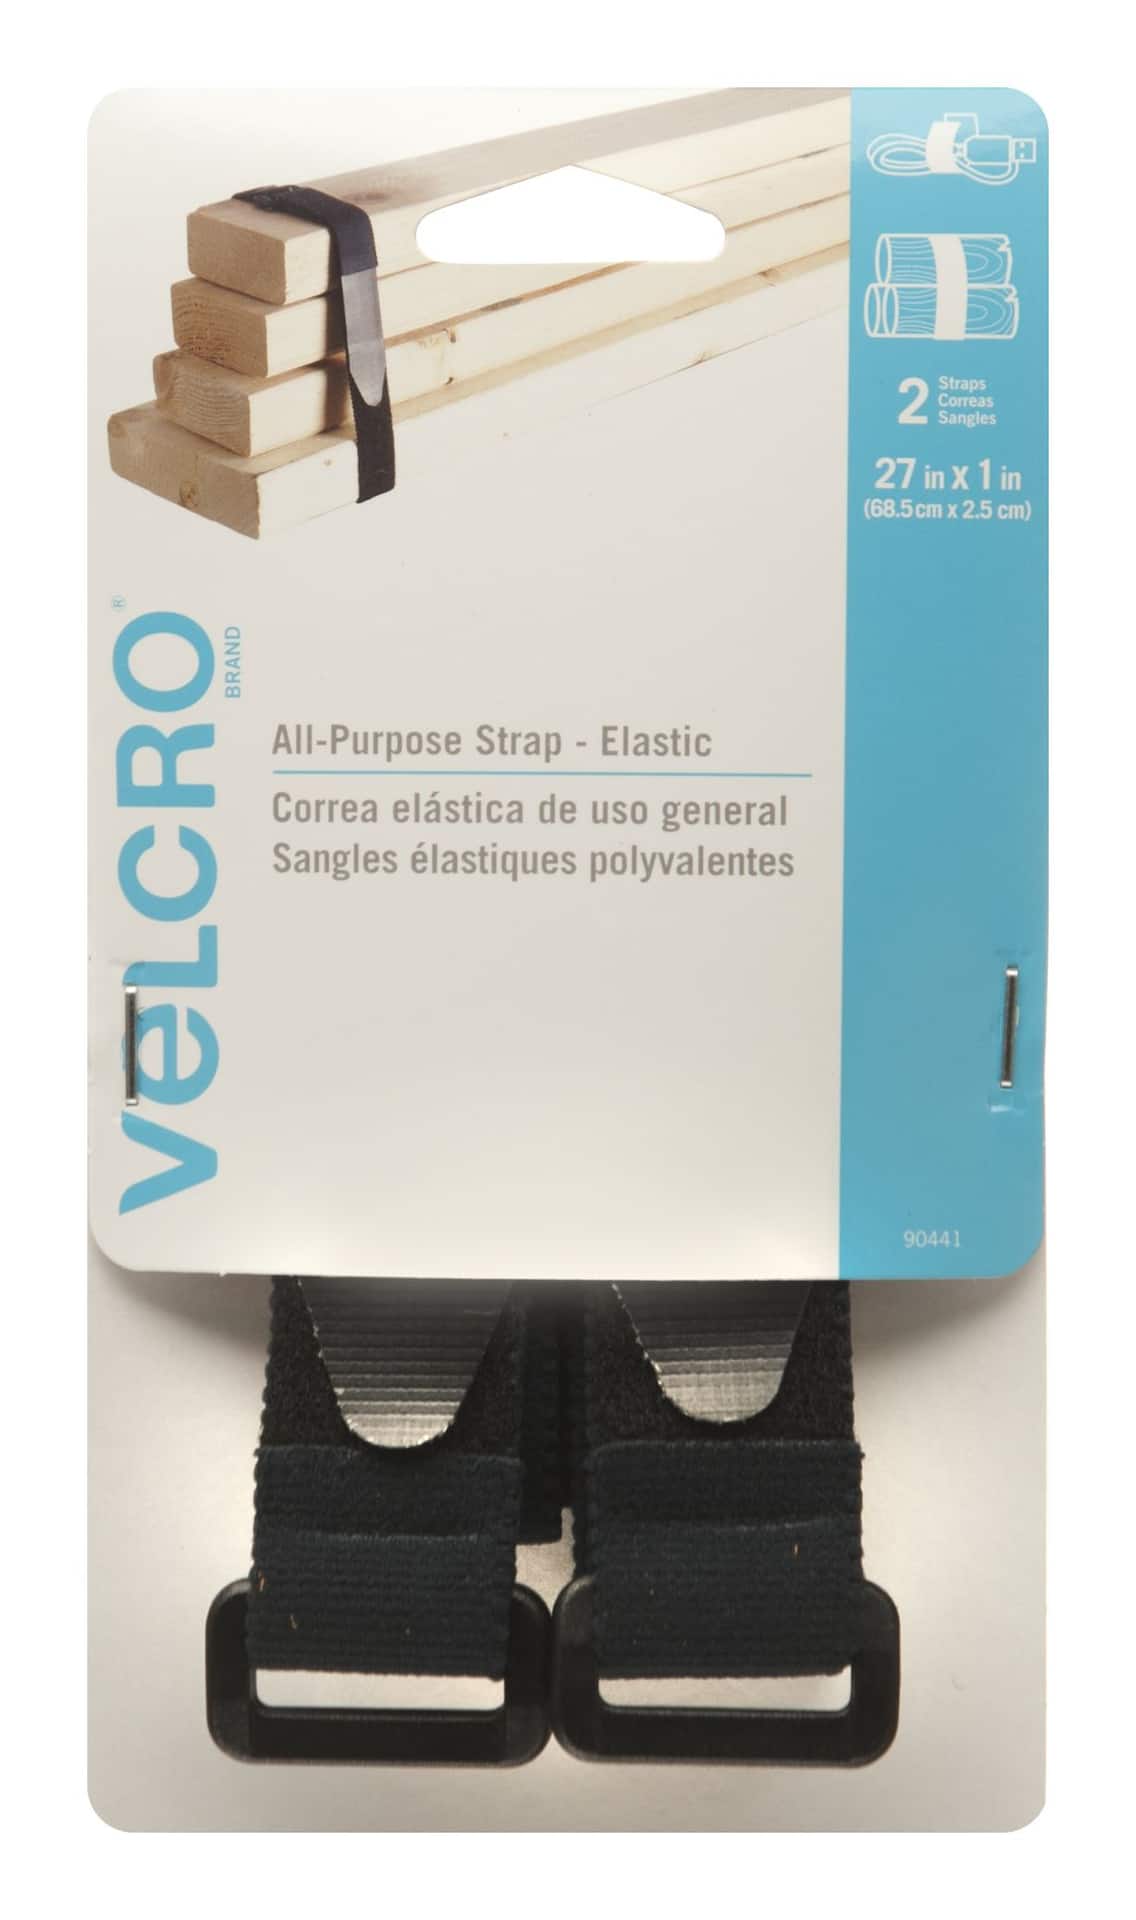 Velcro Reusable Thin Nylon Cable & Wire Ties, Black/Grey, 8 x 1/2-in, 50-pk